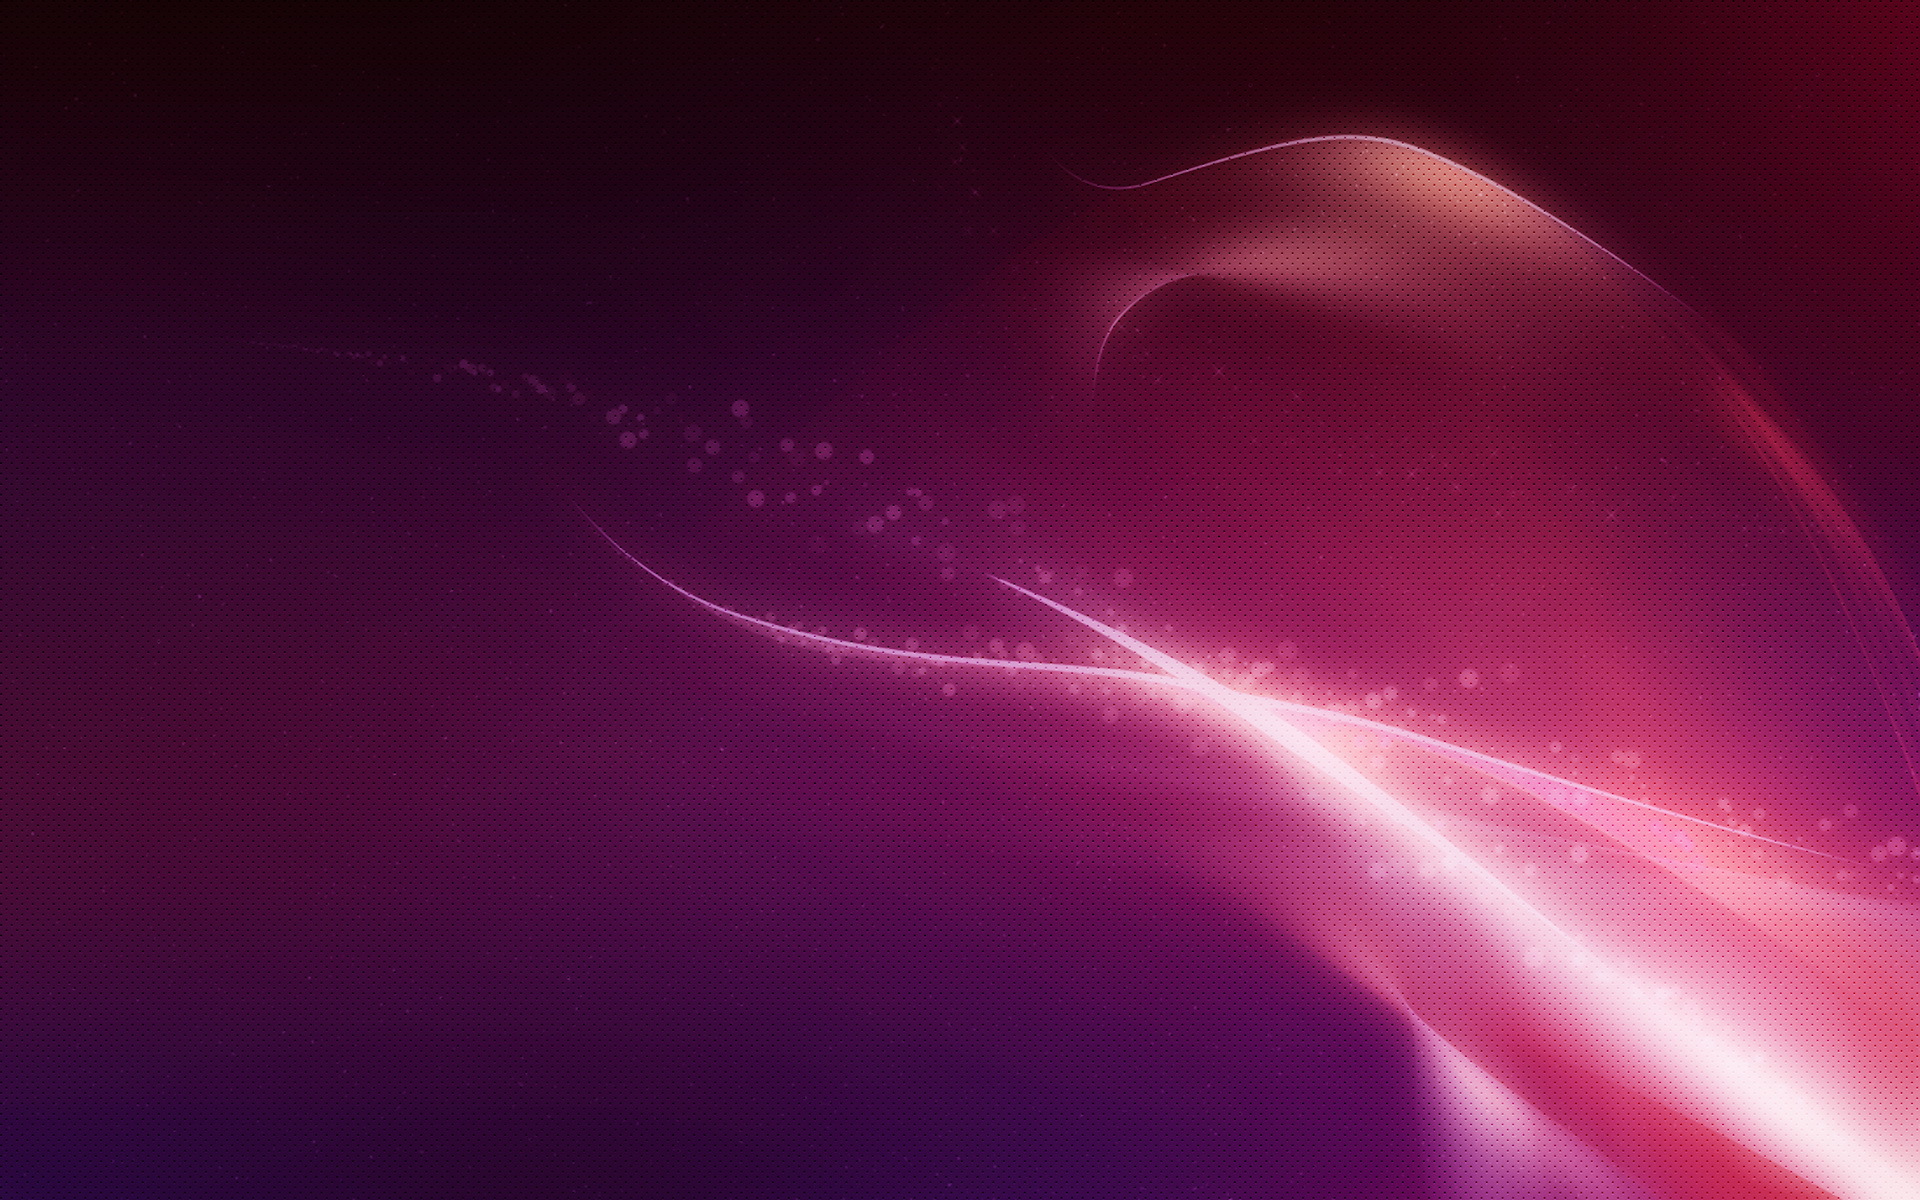 28582 download wallpaper background, abstract, patterns, violet screensavers and pictures for free